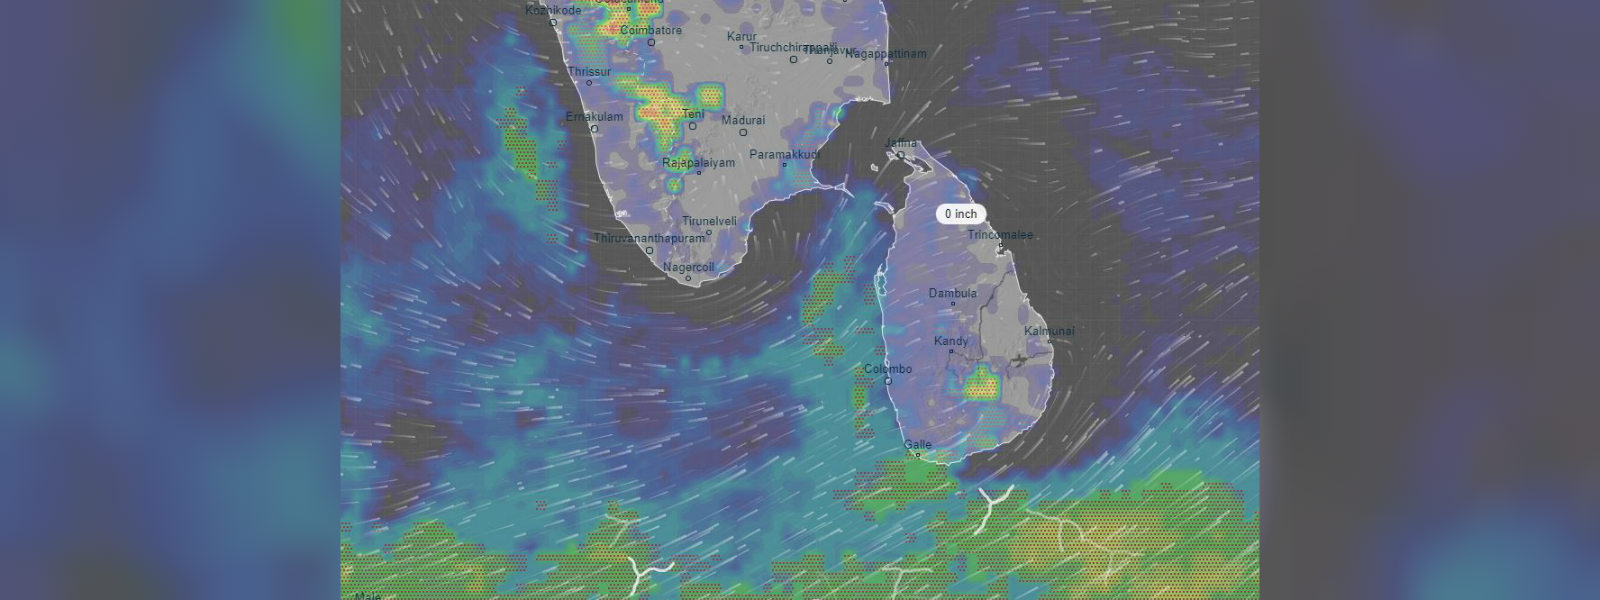 Bulbul cyclonic storm in Bay of Bengal likely to intensify